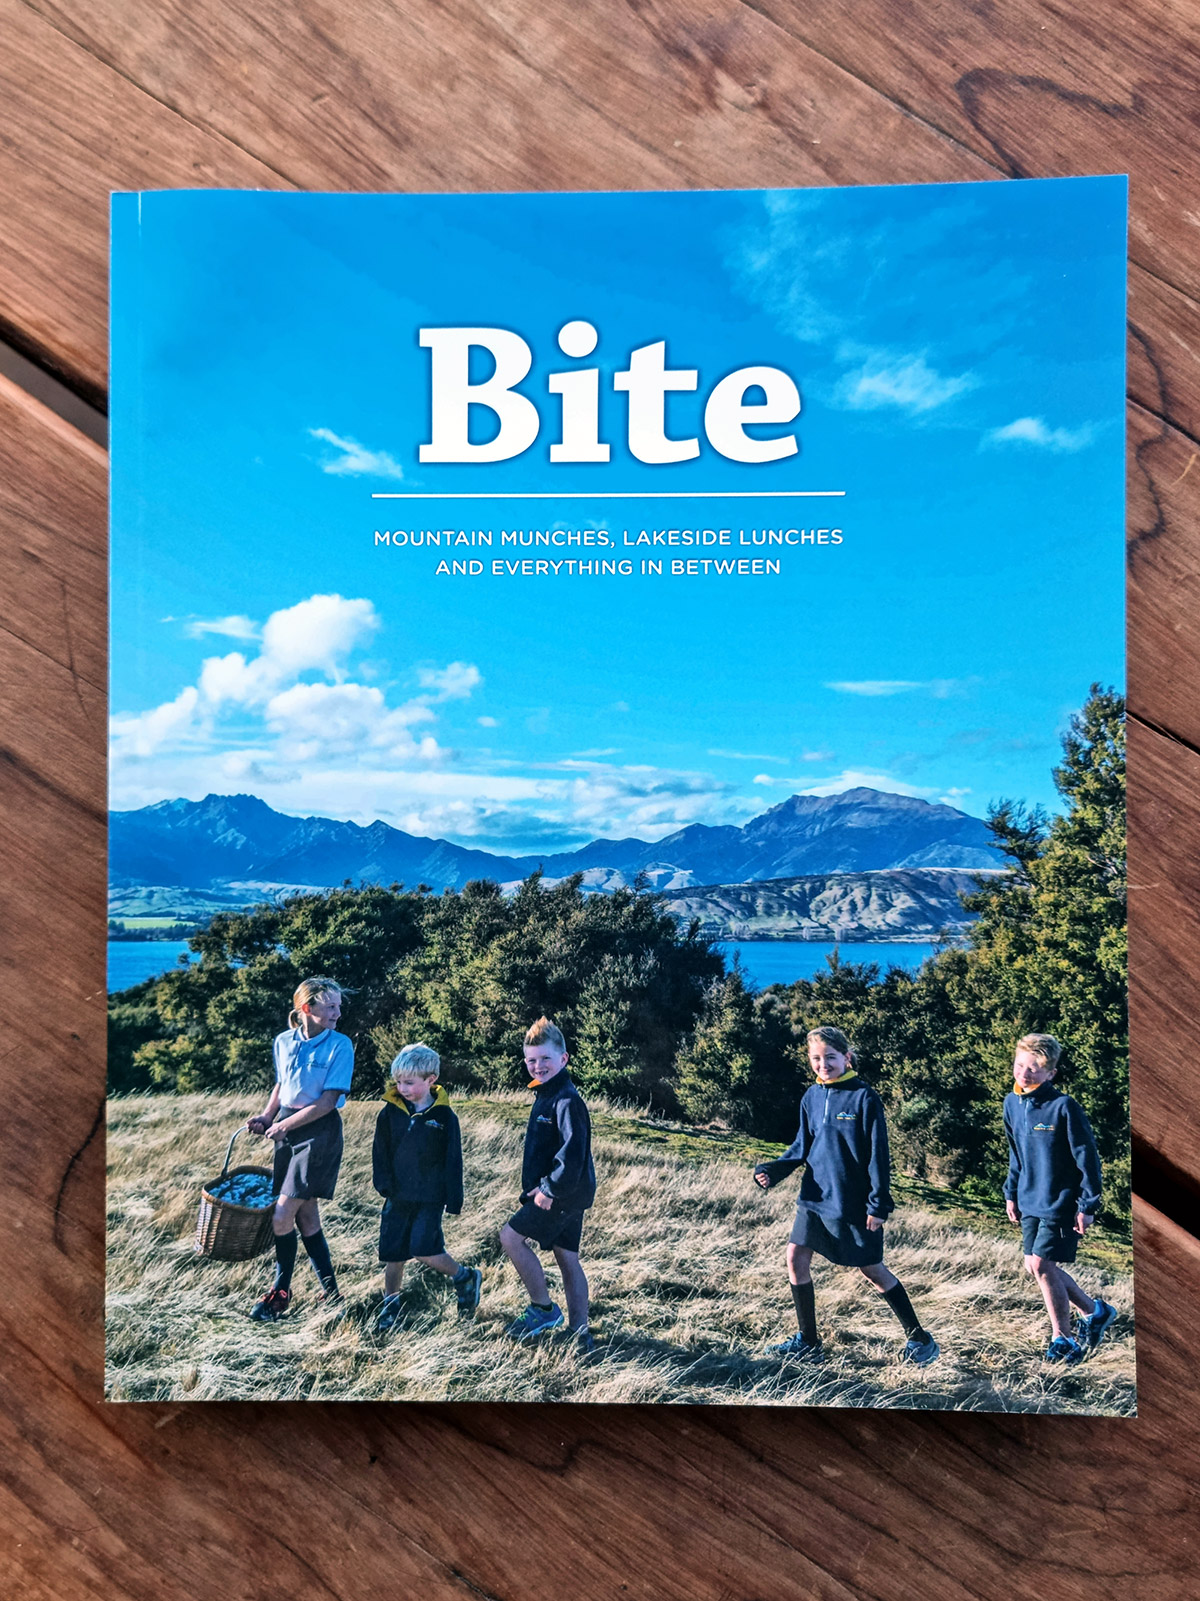 Bite- Mountain Munches, Lakeside Lunches & Everything in between